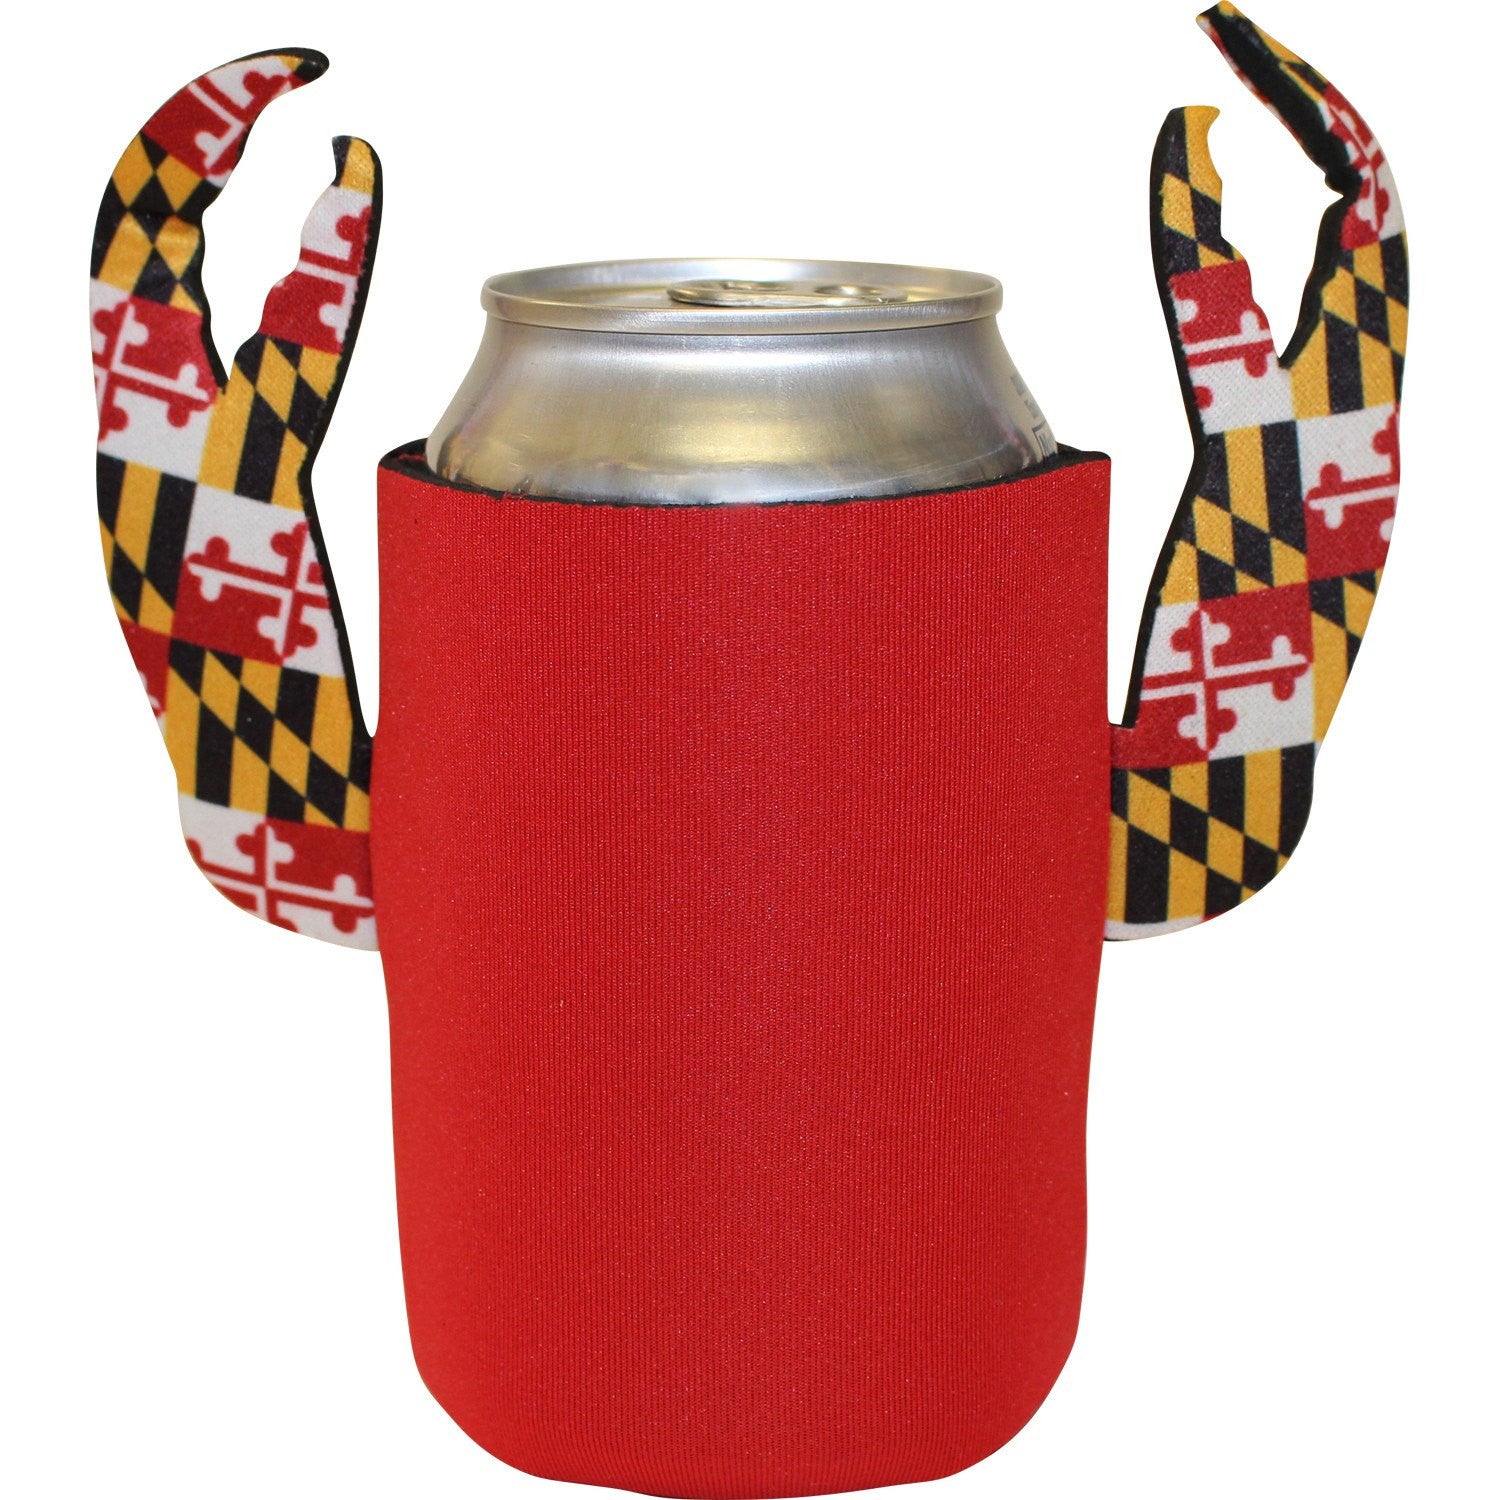 Basic (Red w/ Maryland Claws) / Crab Claw Can Cooler - Route One Apparel